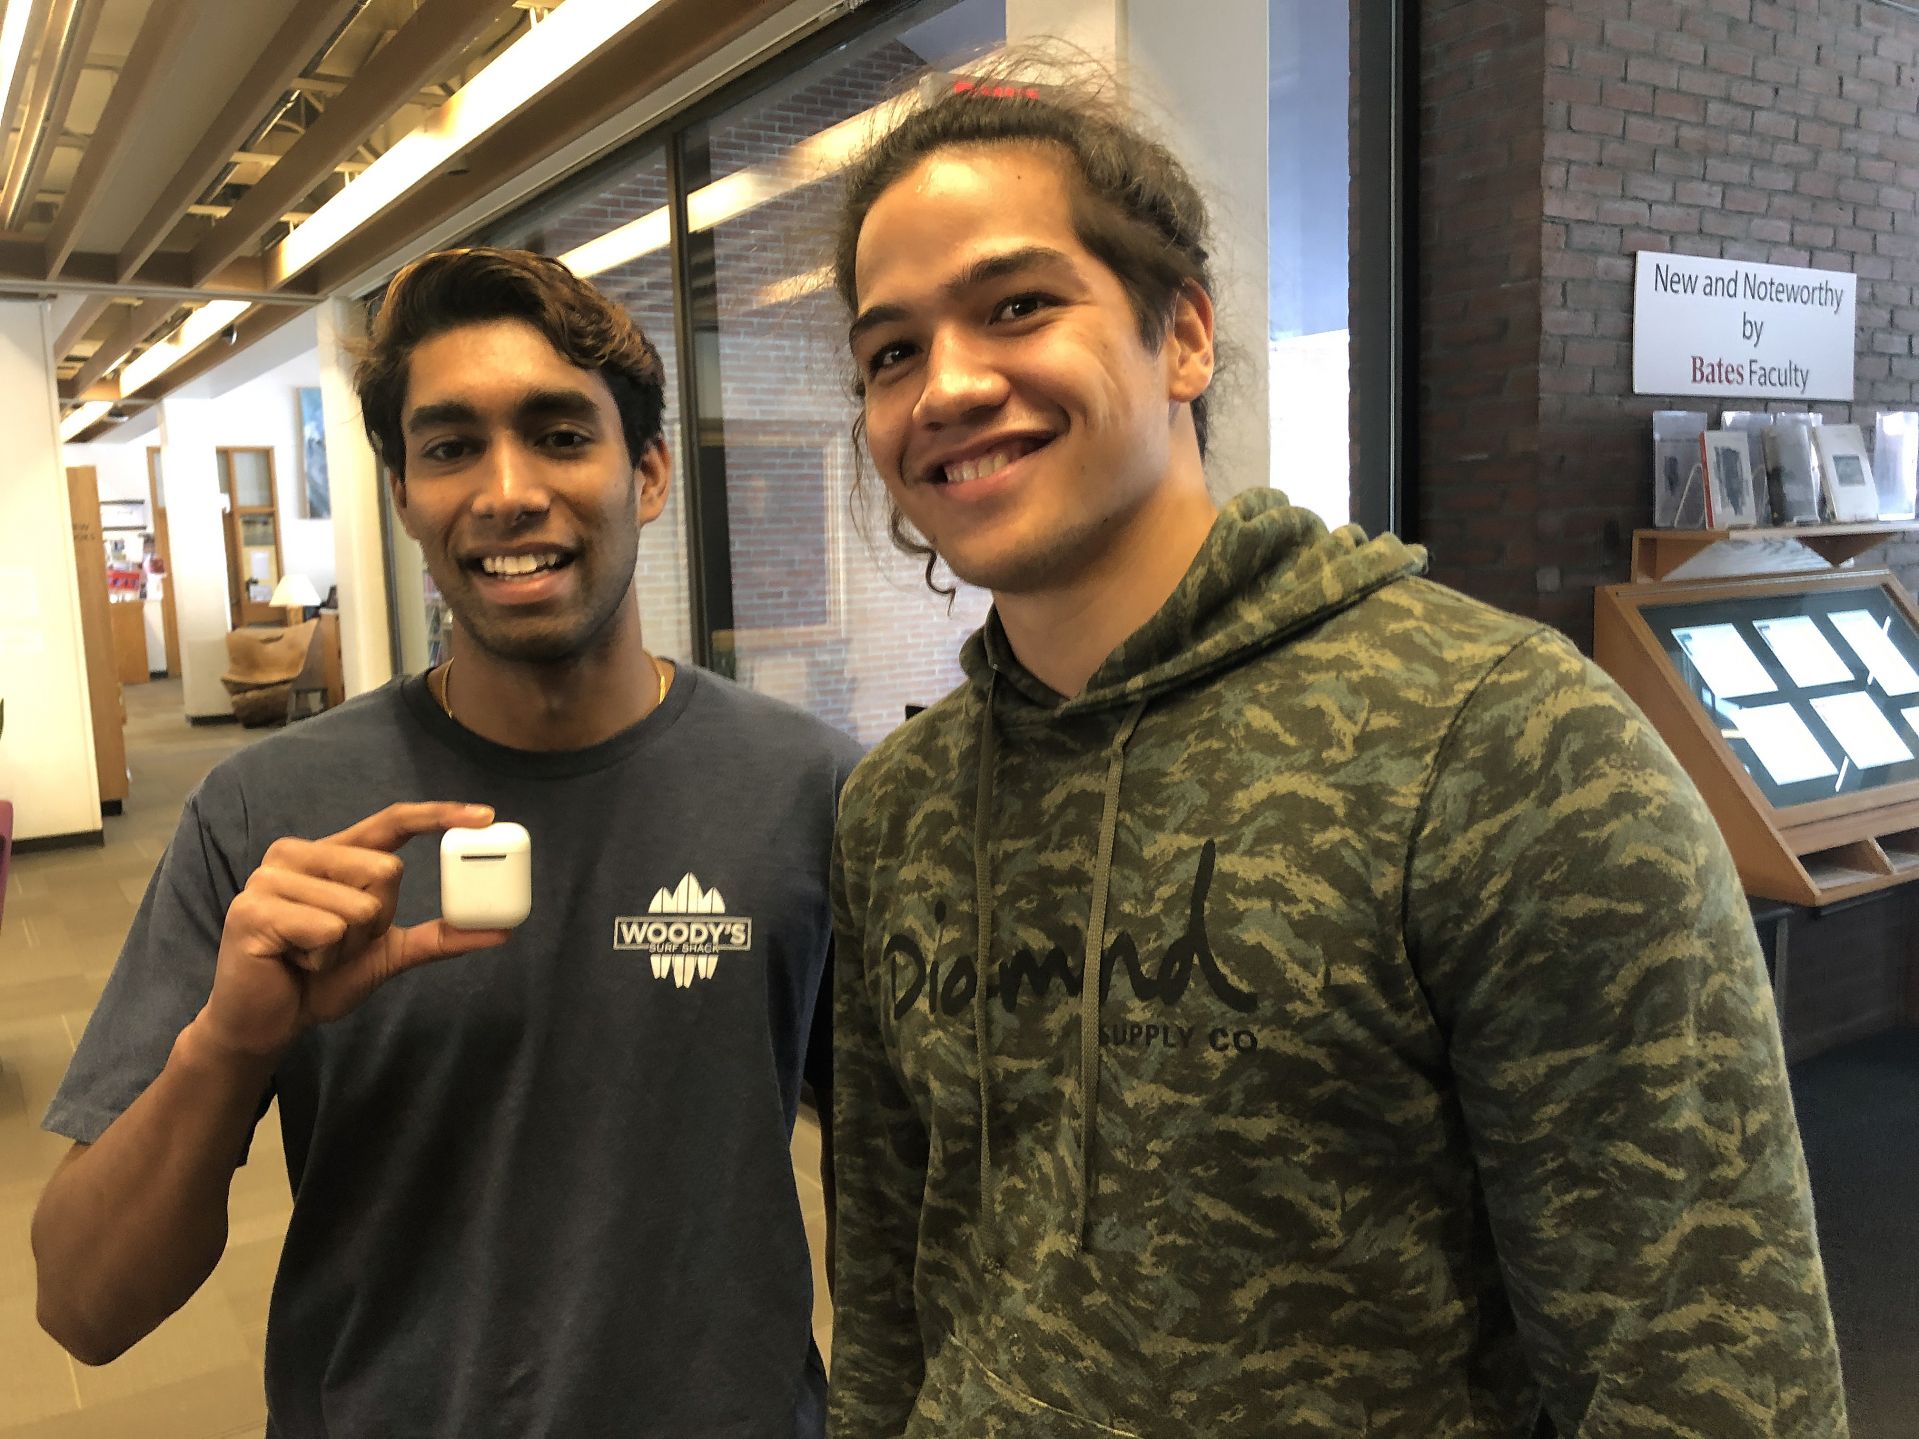 Good buds: Vidyut Yadav ’20 of Chagrin Falls, Ohio, poses with Jaimin Keliihoomalu ’21 of Kapolei, Hawaii, after the case of the lost ear buds was solved. (Jay Burns/Bates College)